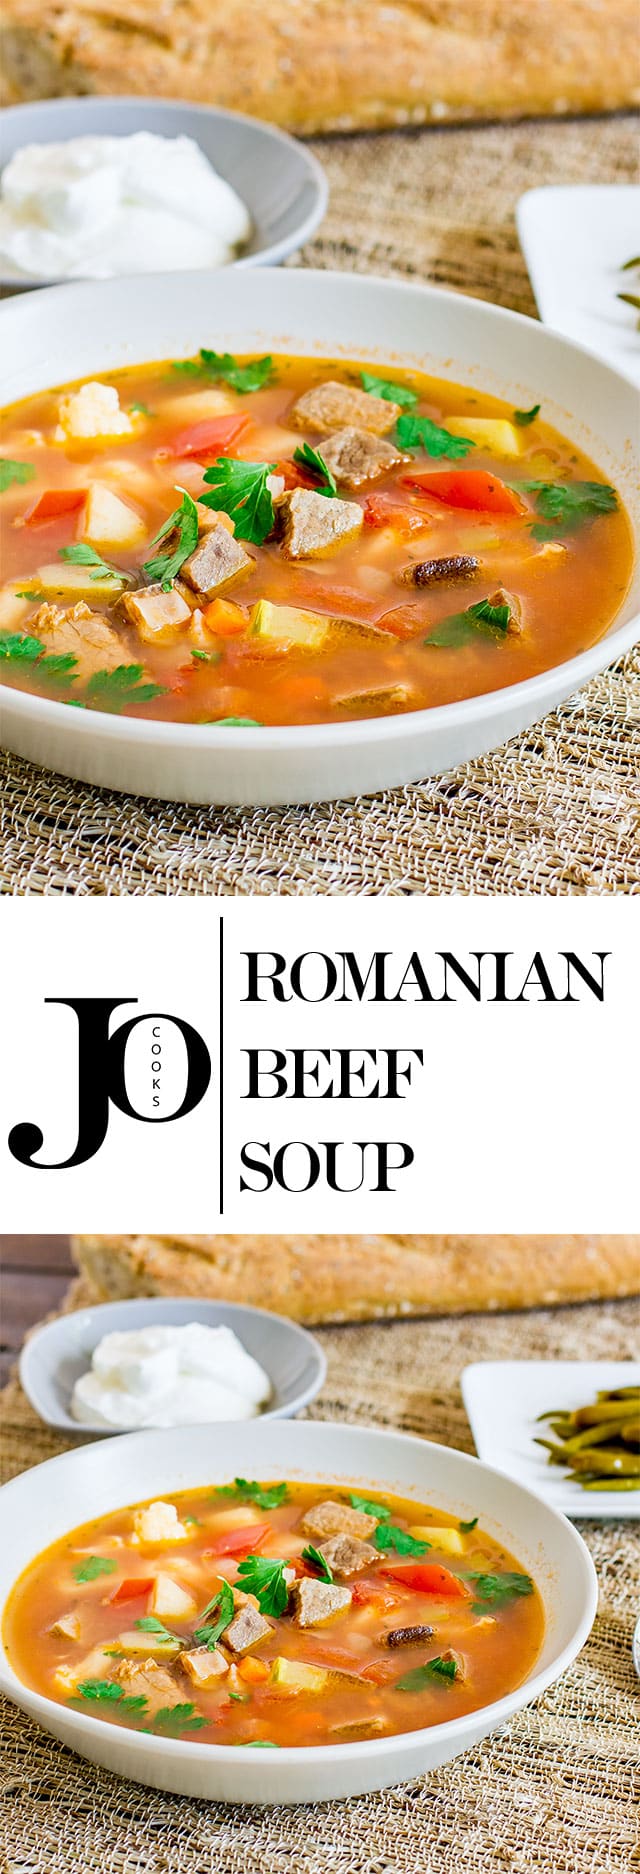 Beef Soup – a traditional Romanian soup full of veggies, very healthy and delicious. The beef is cooked for 3 hours thereby making it super moist.